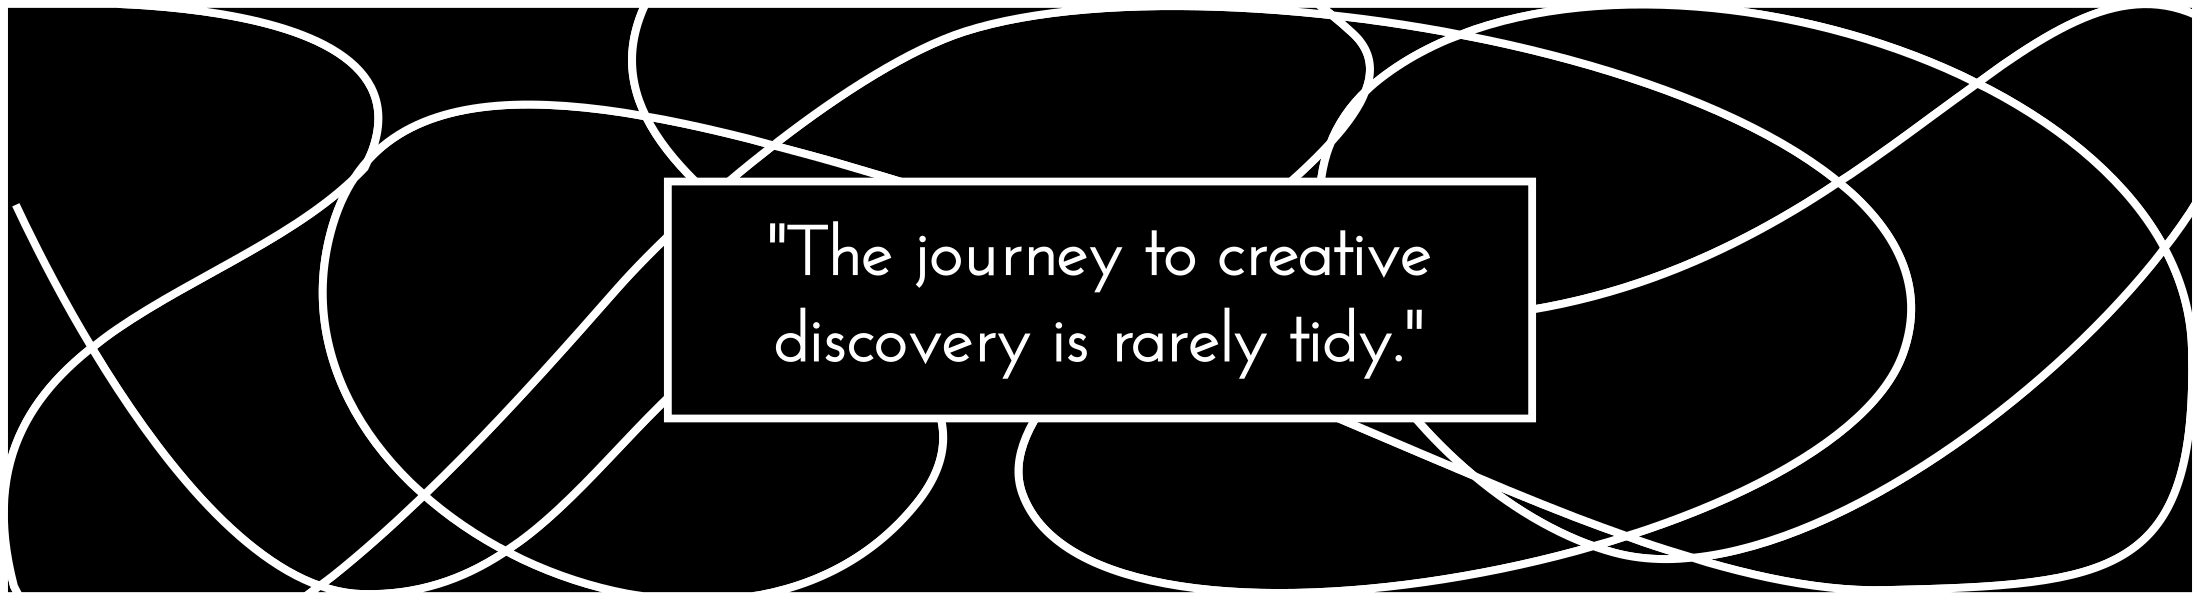 The journey to creative discovery is rarely tidy